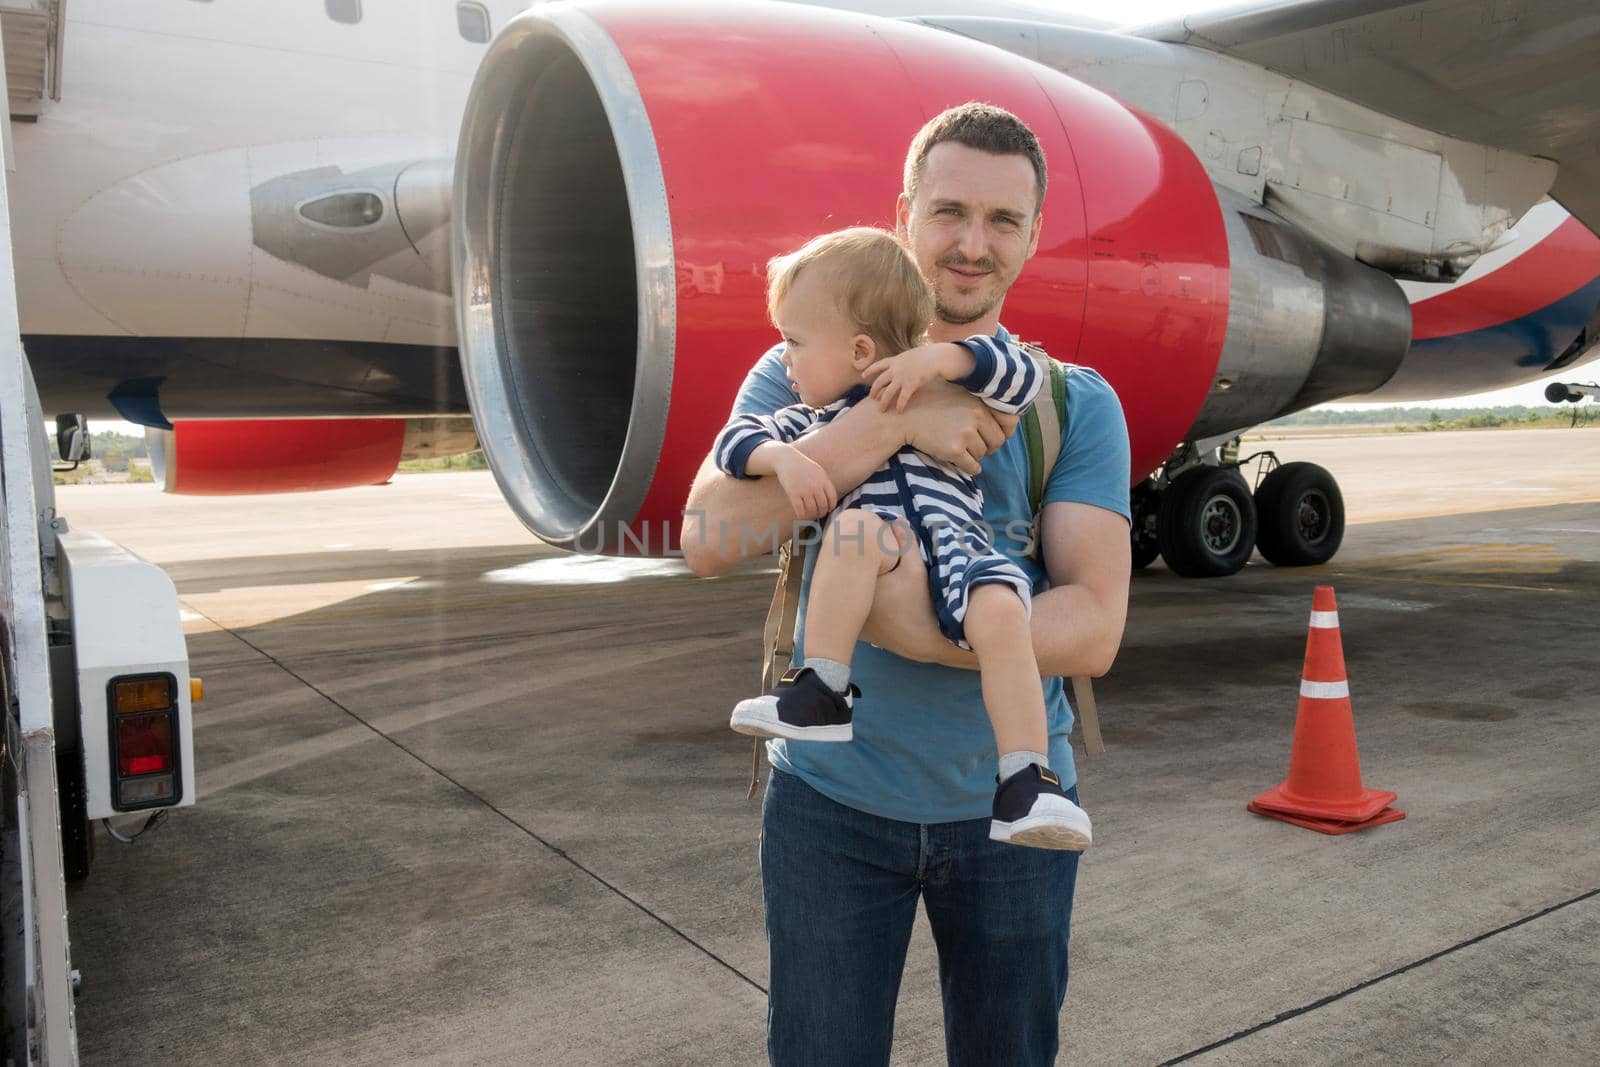 Family Father and child boarding on plane in airport, summer vacation airfield